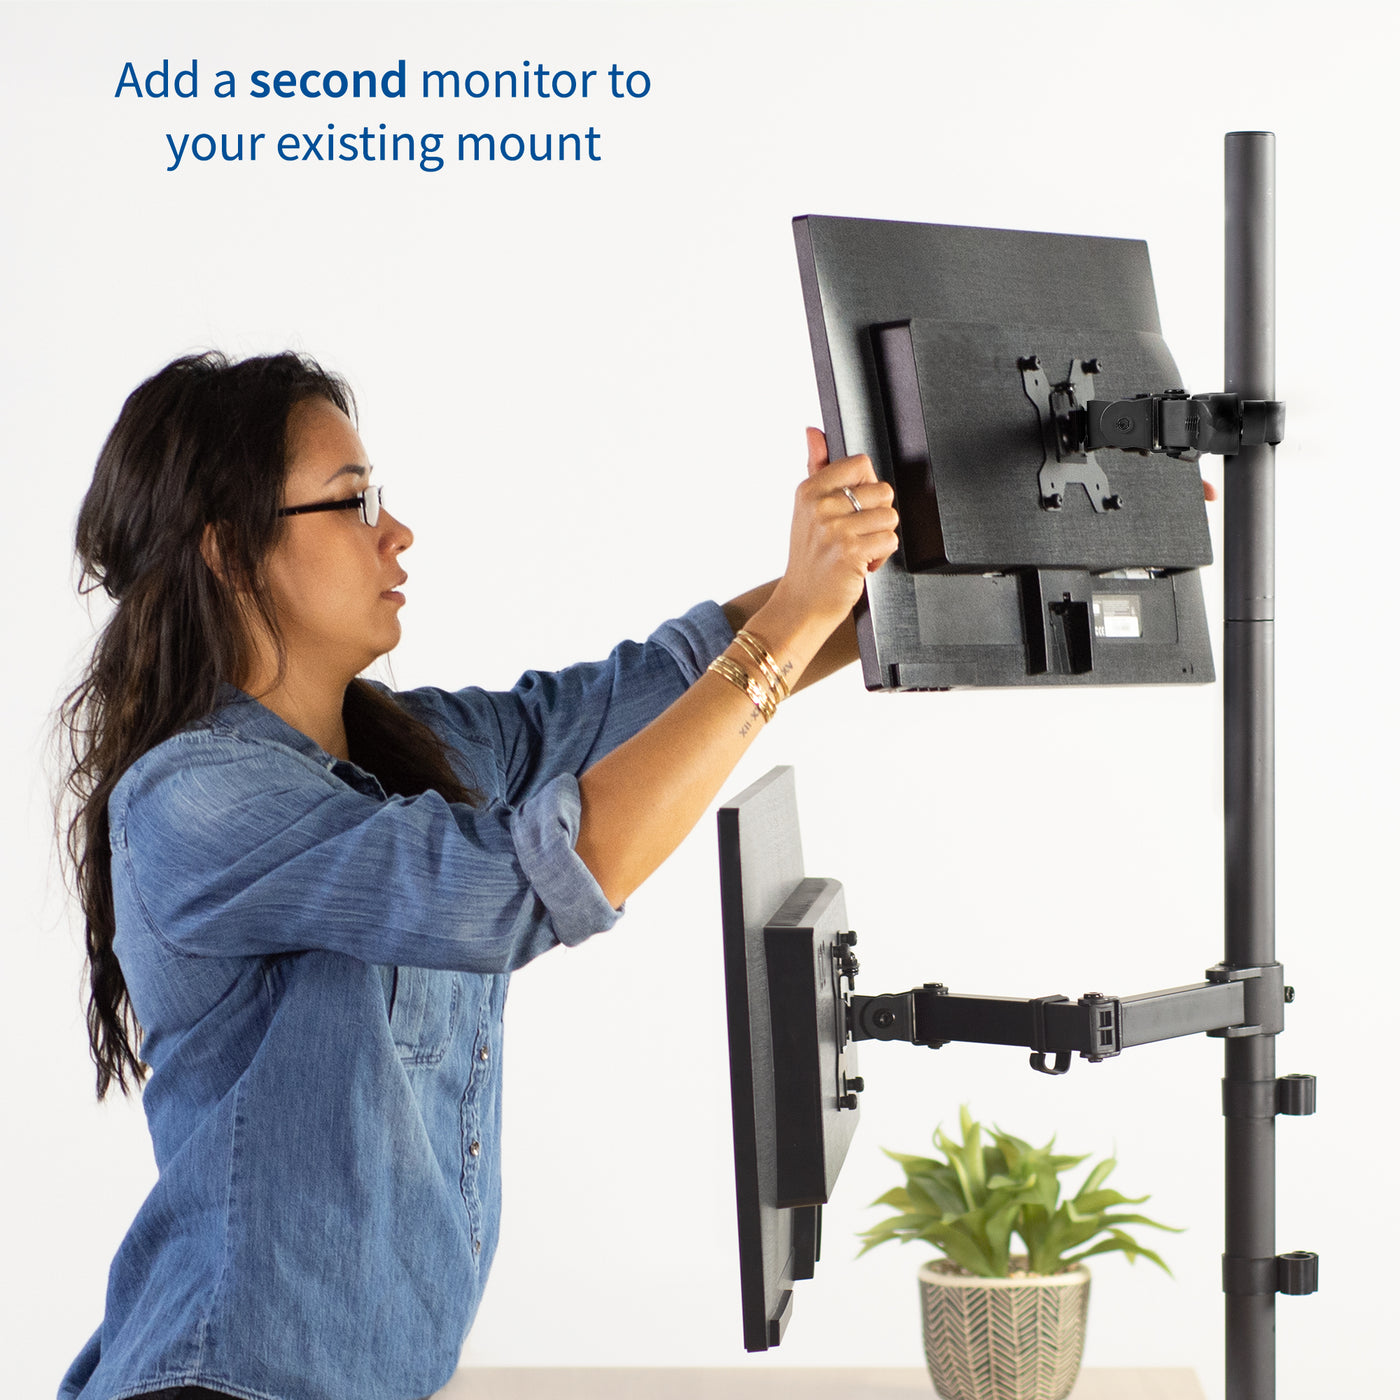 This bracket allows you to attach a second monitor to your current office space.